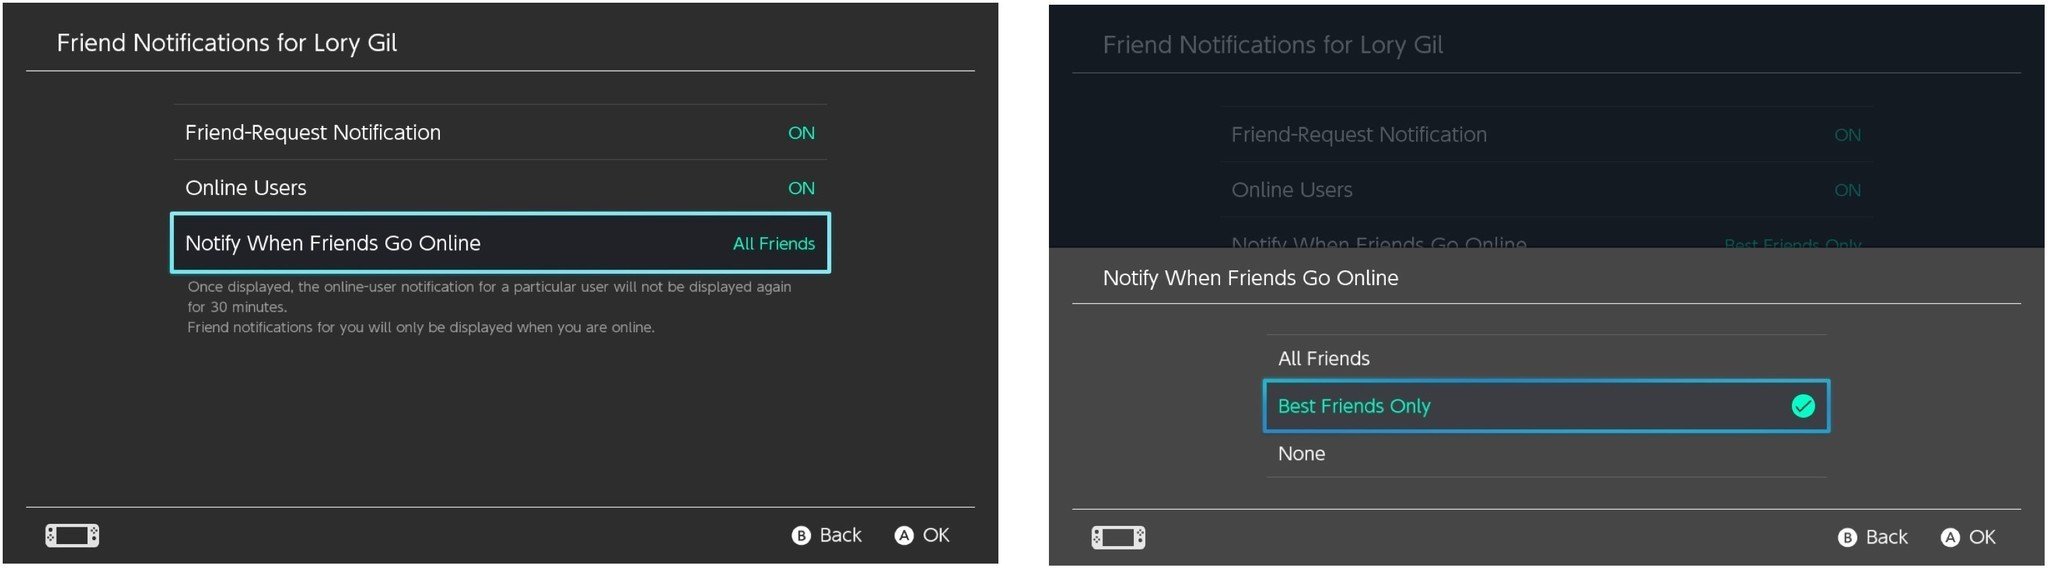 Select Notify When Friends Go Online, then select the type of friends